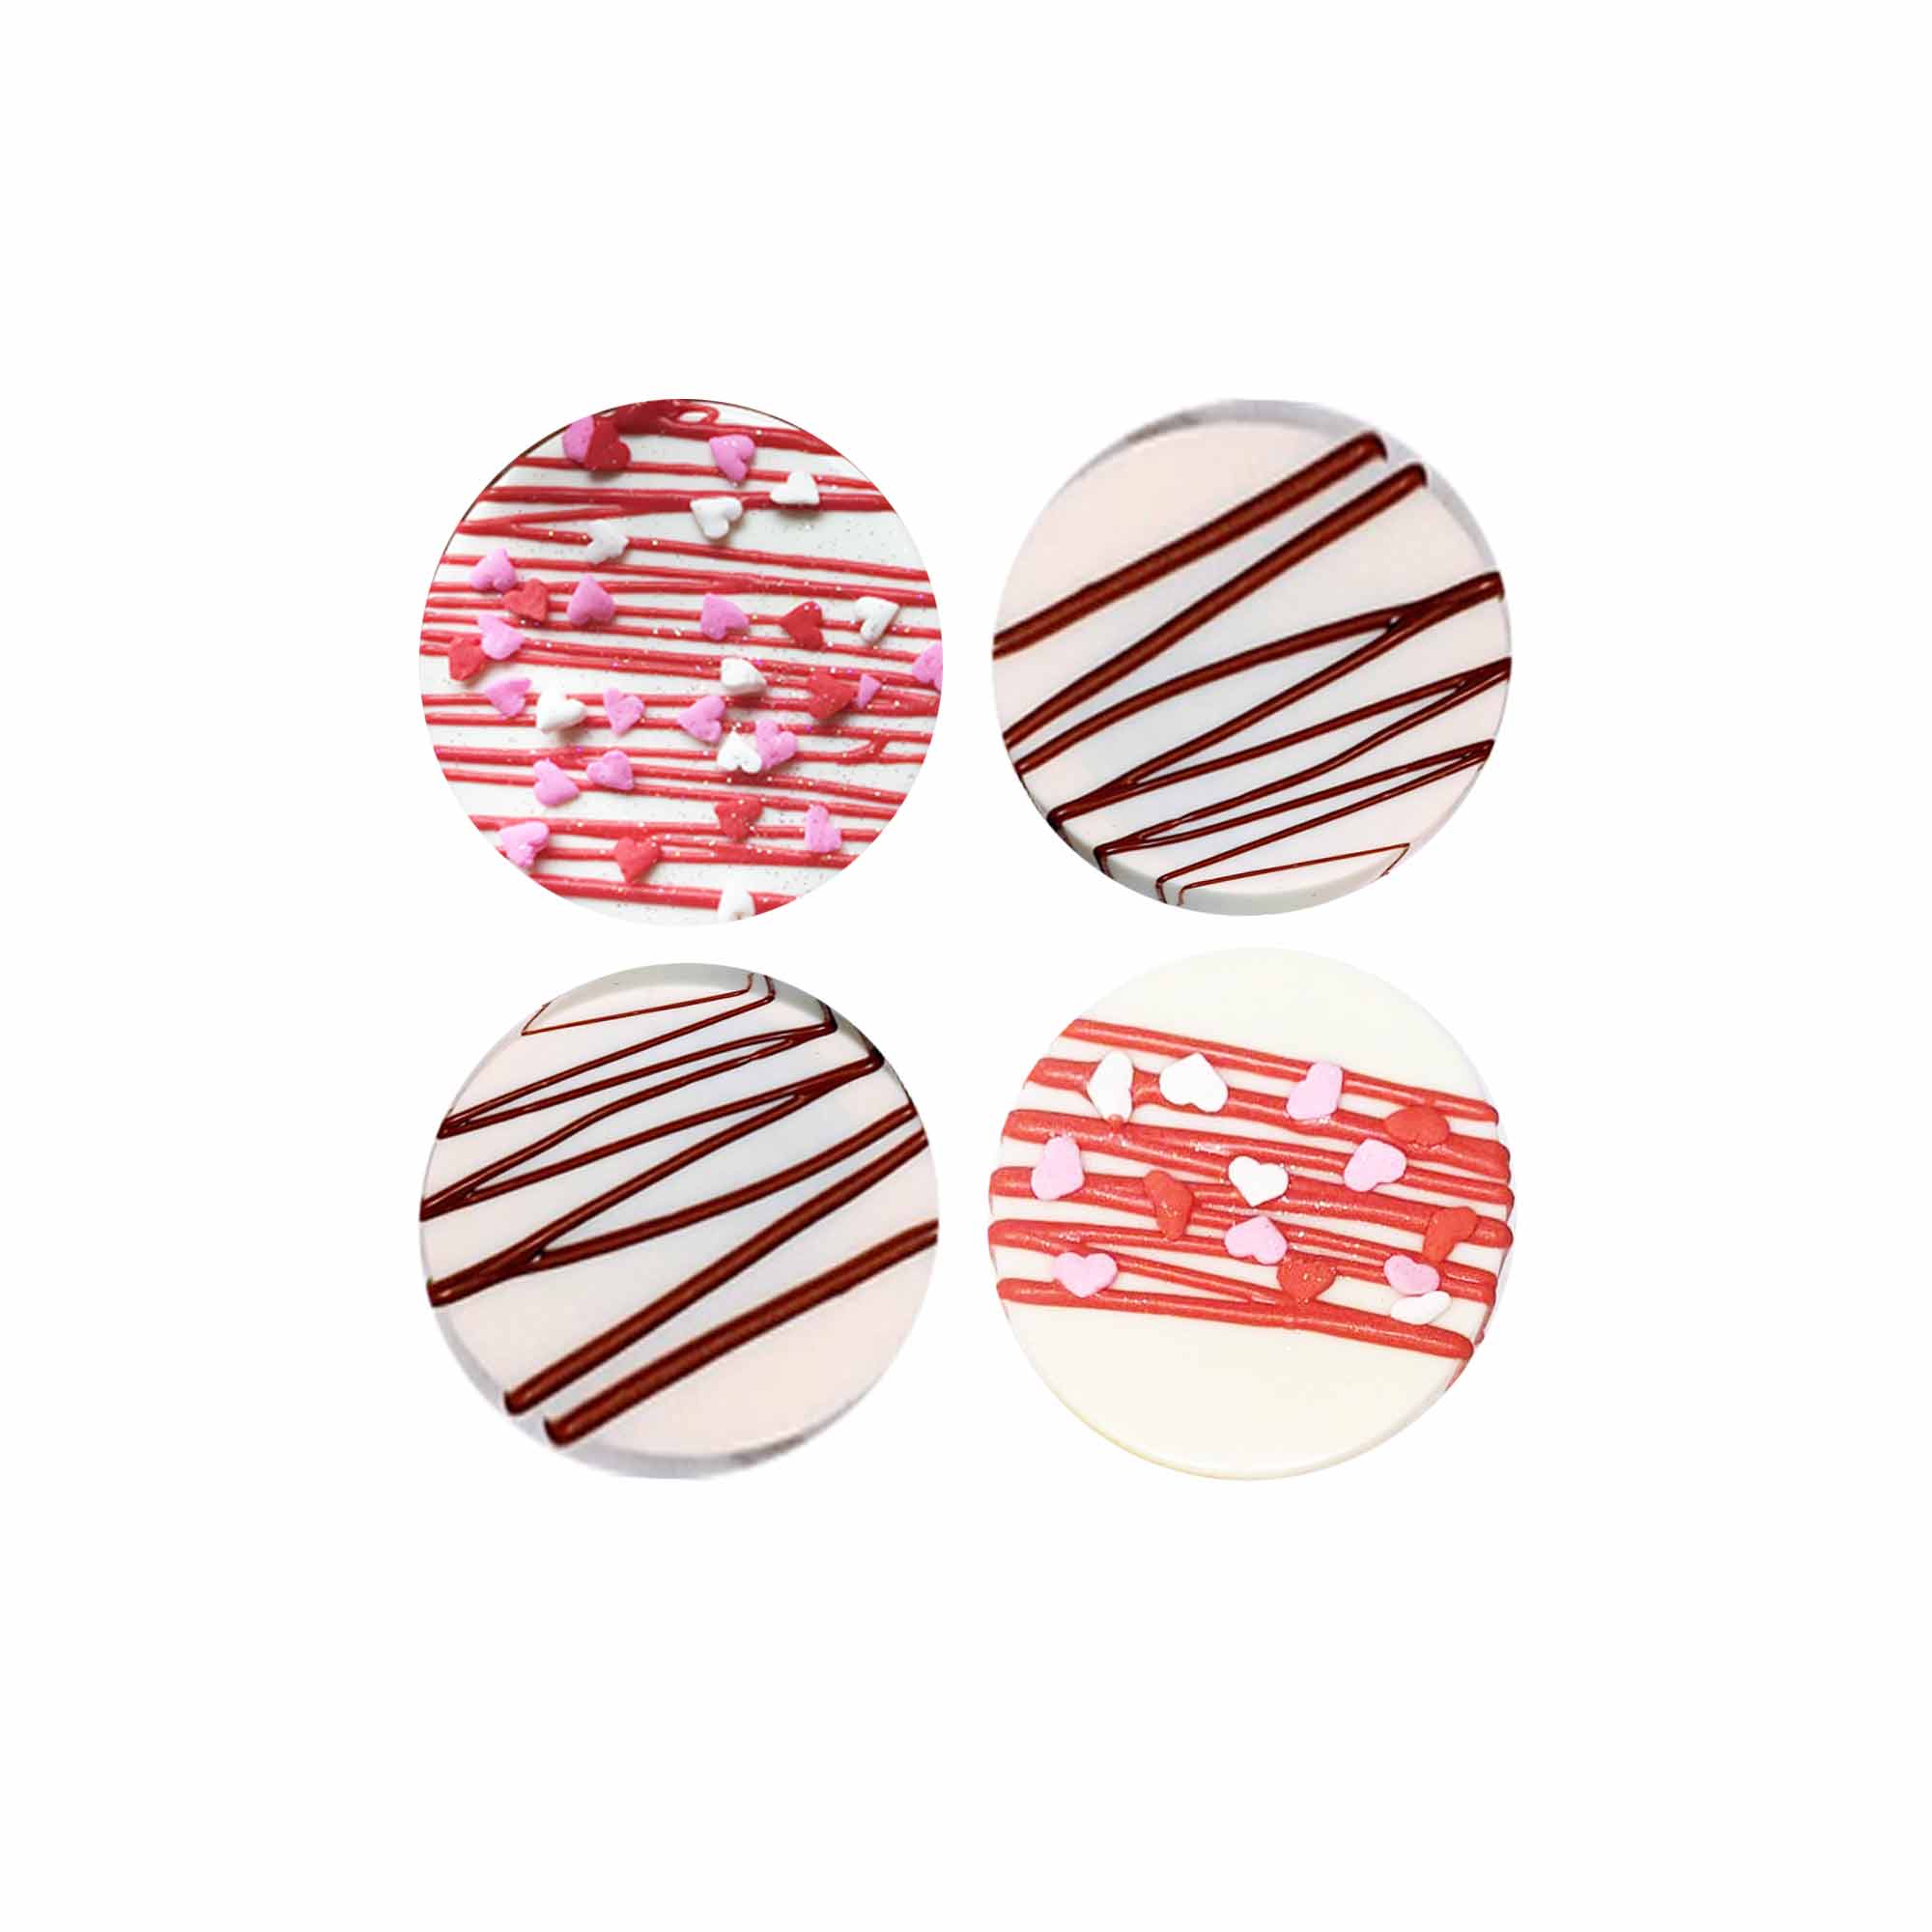 Chocolate Covered Oreos 4 Pack